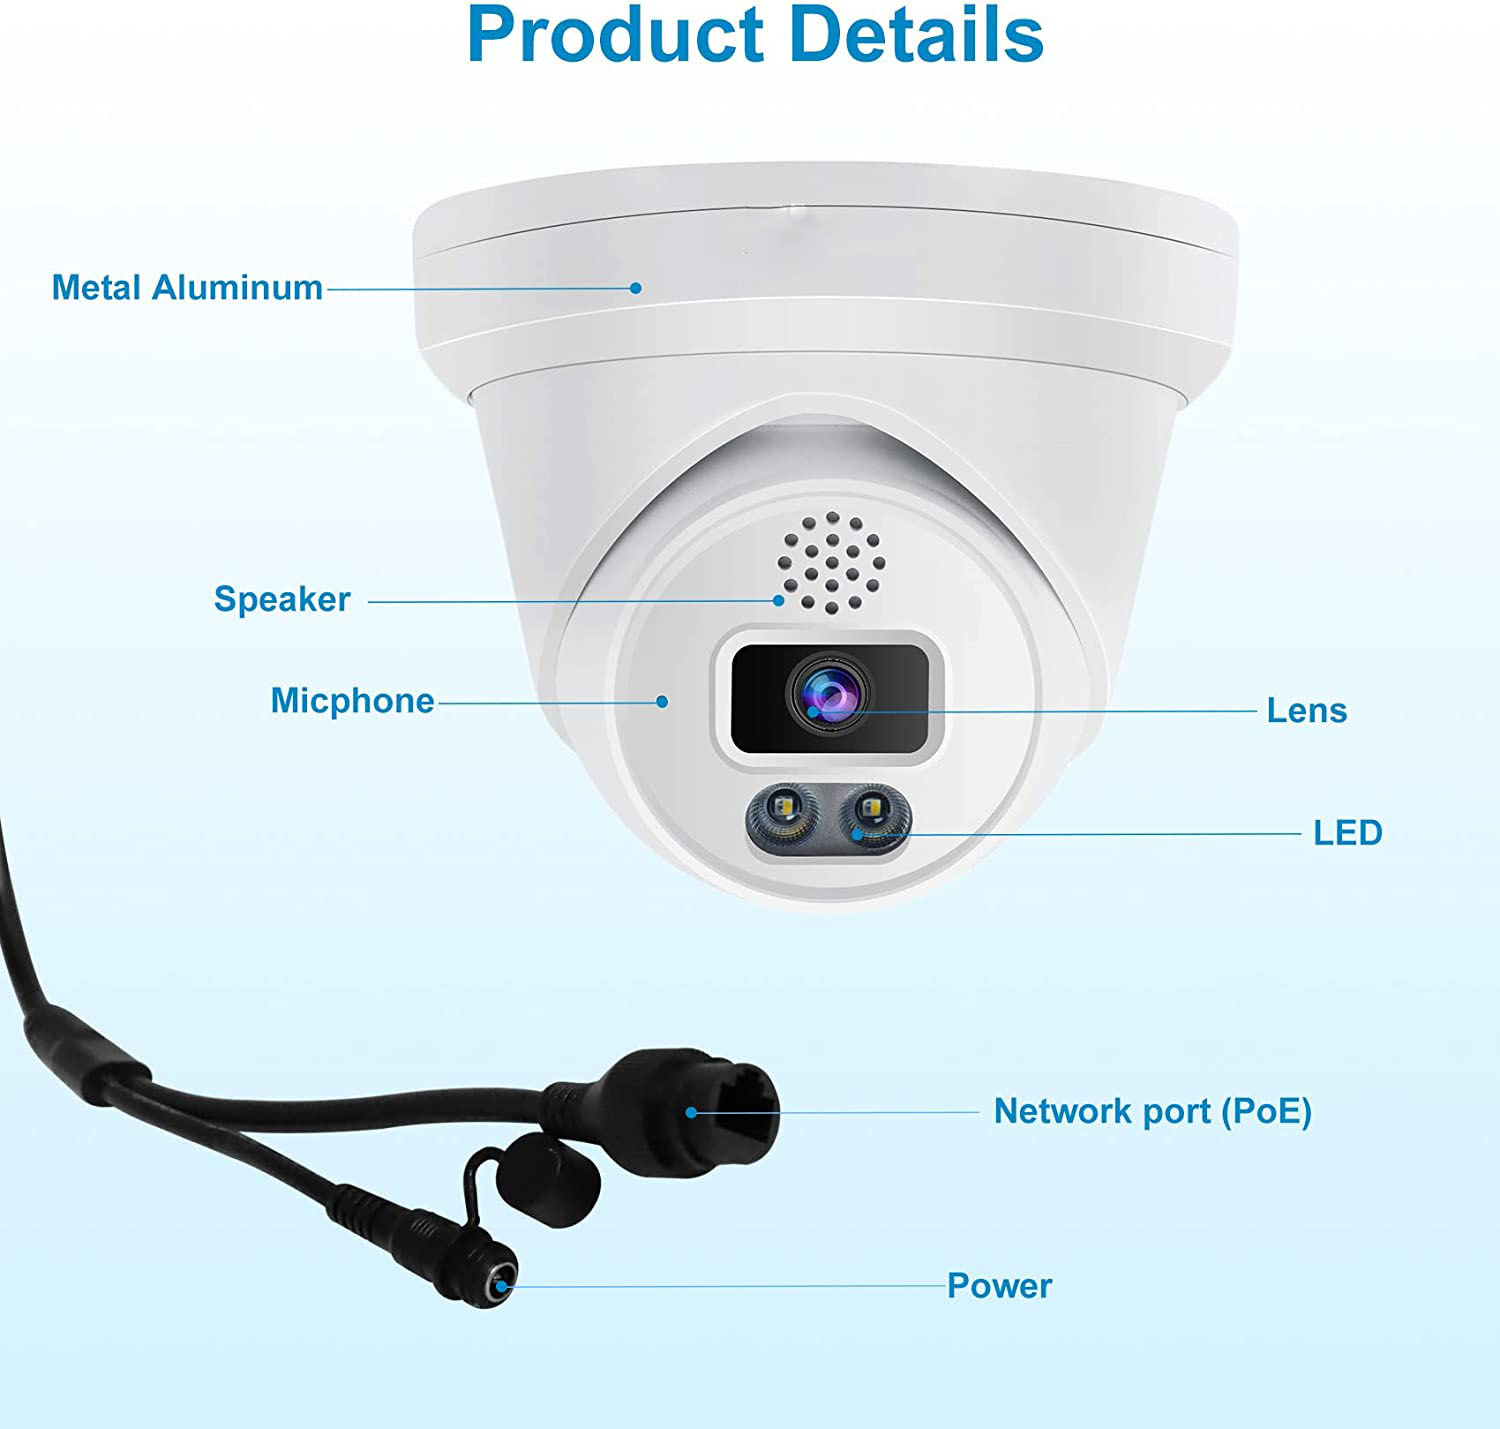 Microseven Open Source 4K/8MP Full Color Night Vision PoE Indoor / Outdoor IP Camera, UltraHD 8MP PoE IP Turret Security Camera with Human/Vehicle Detection, Two-Way Audio Wide Angle, WDR, DNR, 256GB SD Slot, Waterproof, ONVIF CCTV Surveillance Camera, Web GUI & Apps, VMS (Video Management System) Cloud Storage+ Broadcasting on YouTube, Facebook & Microseven.tv